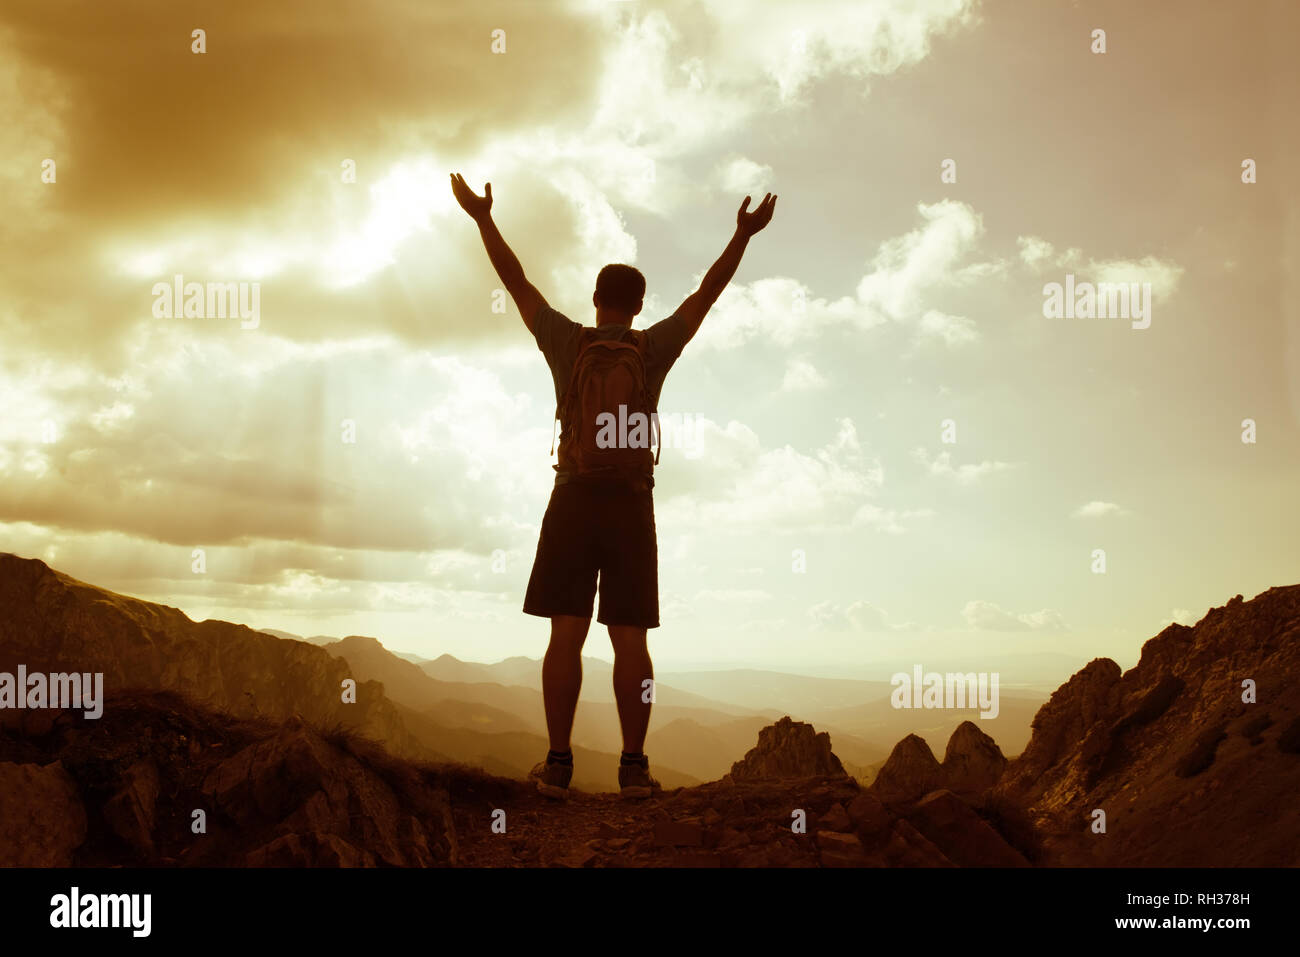 silhouette of successful man on the top of mountain. Concept of sport motivation inspiration Stock Photo